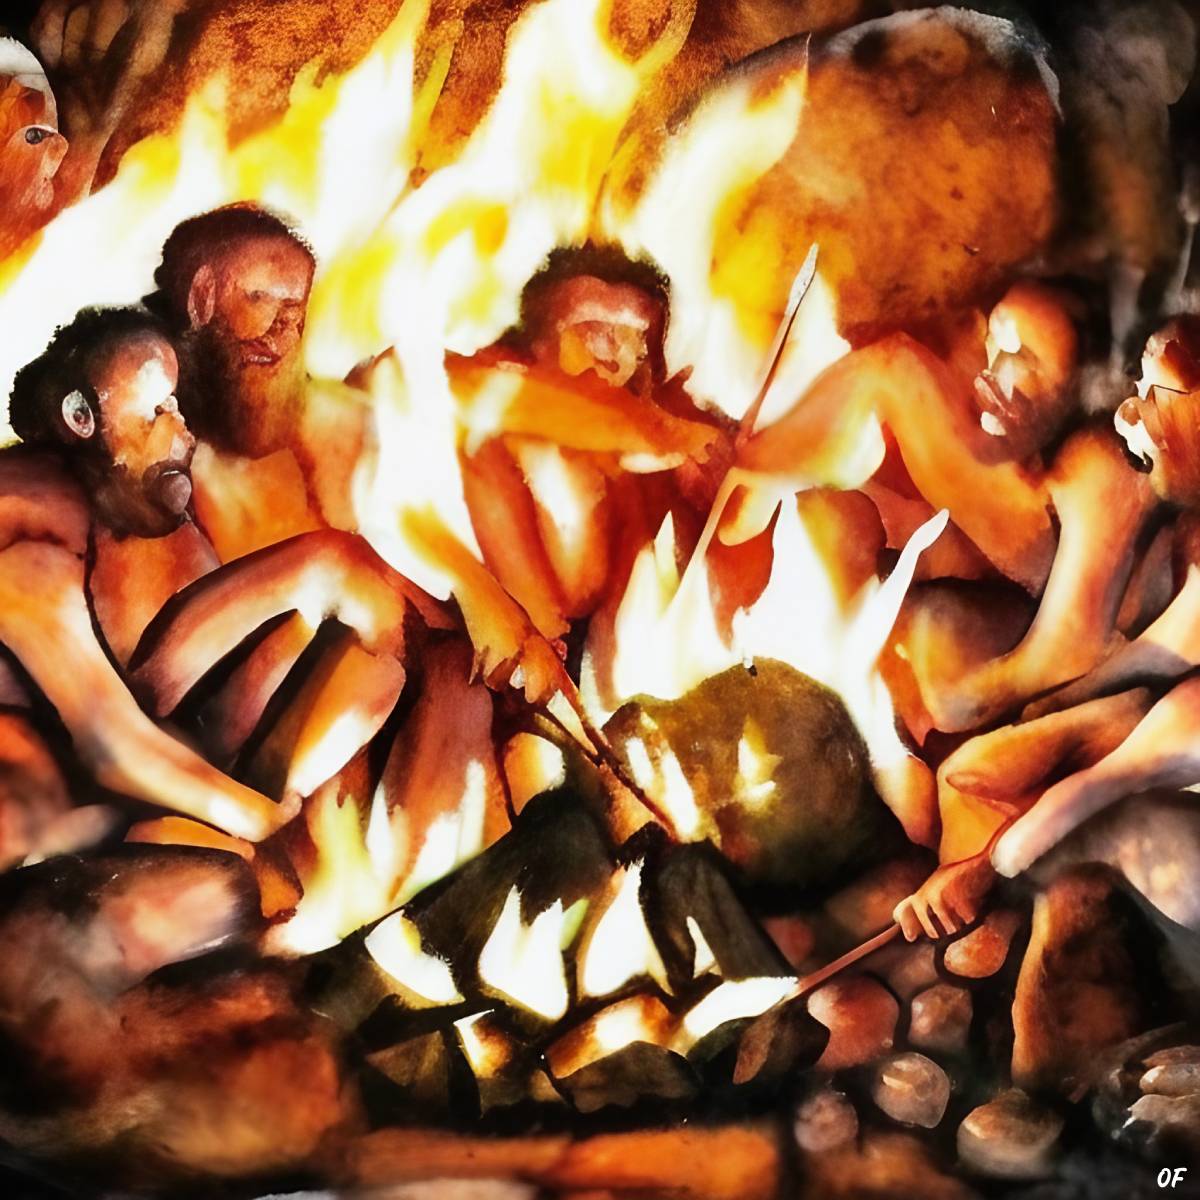 A group of cavemen roasting mammoth meatballs over a fire.